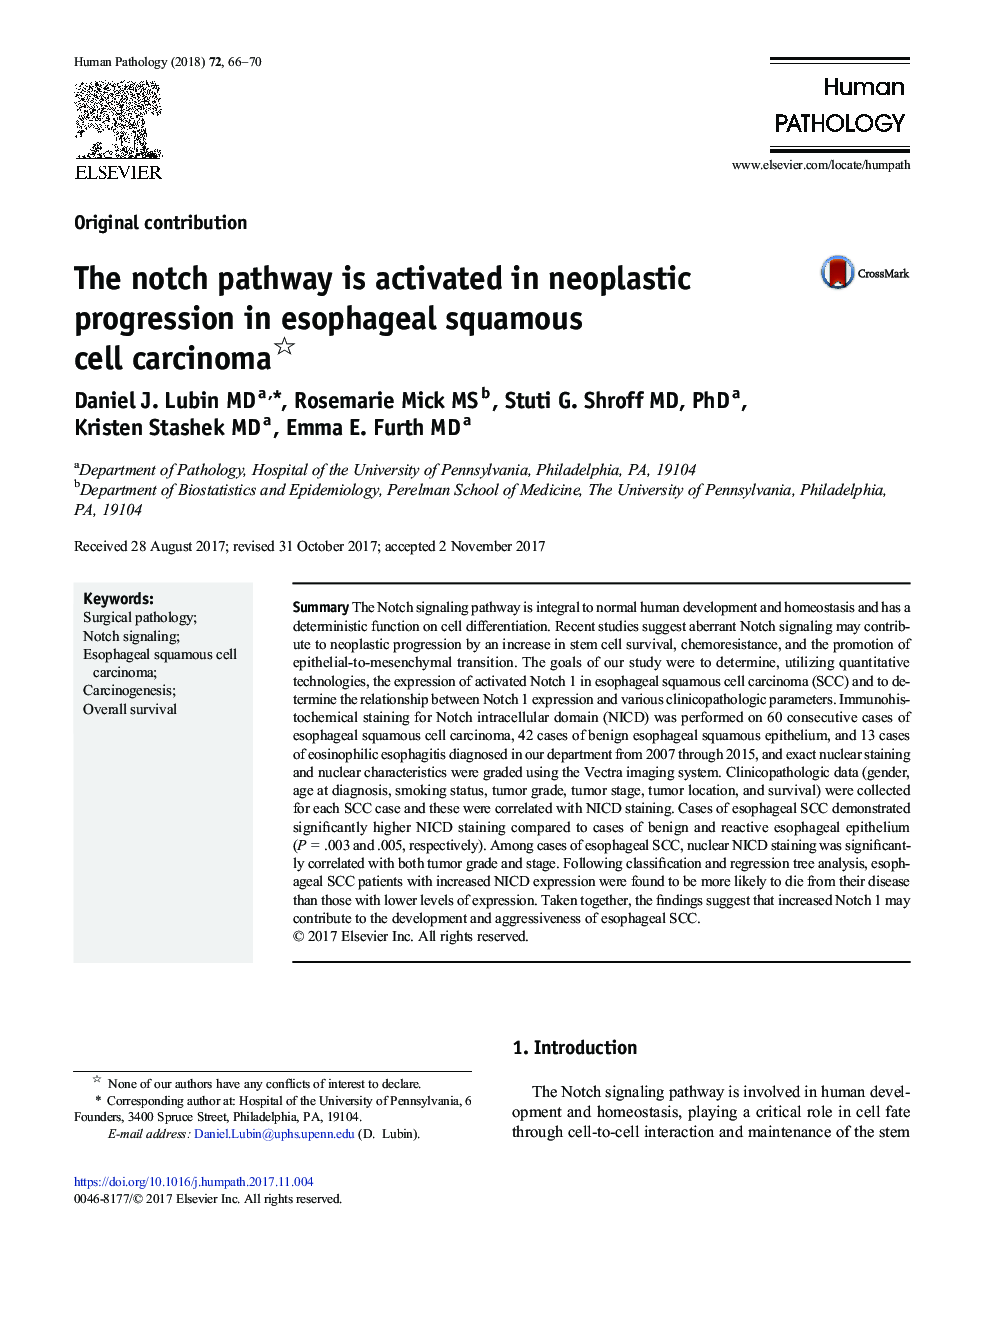 The notch pathway is activated in neoplastic progression in esophageal squamous cell carcinoma